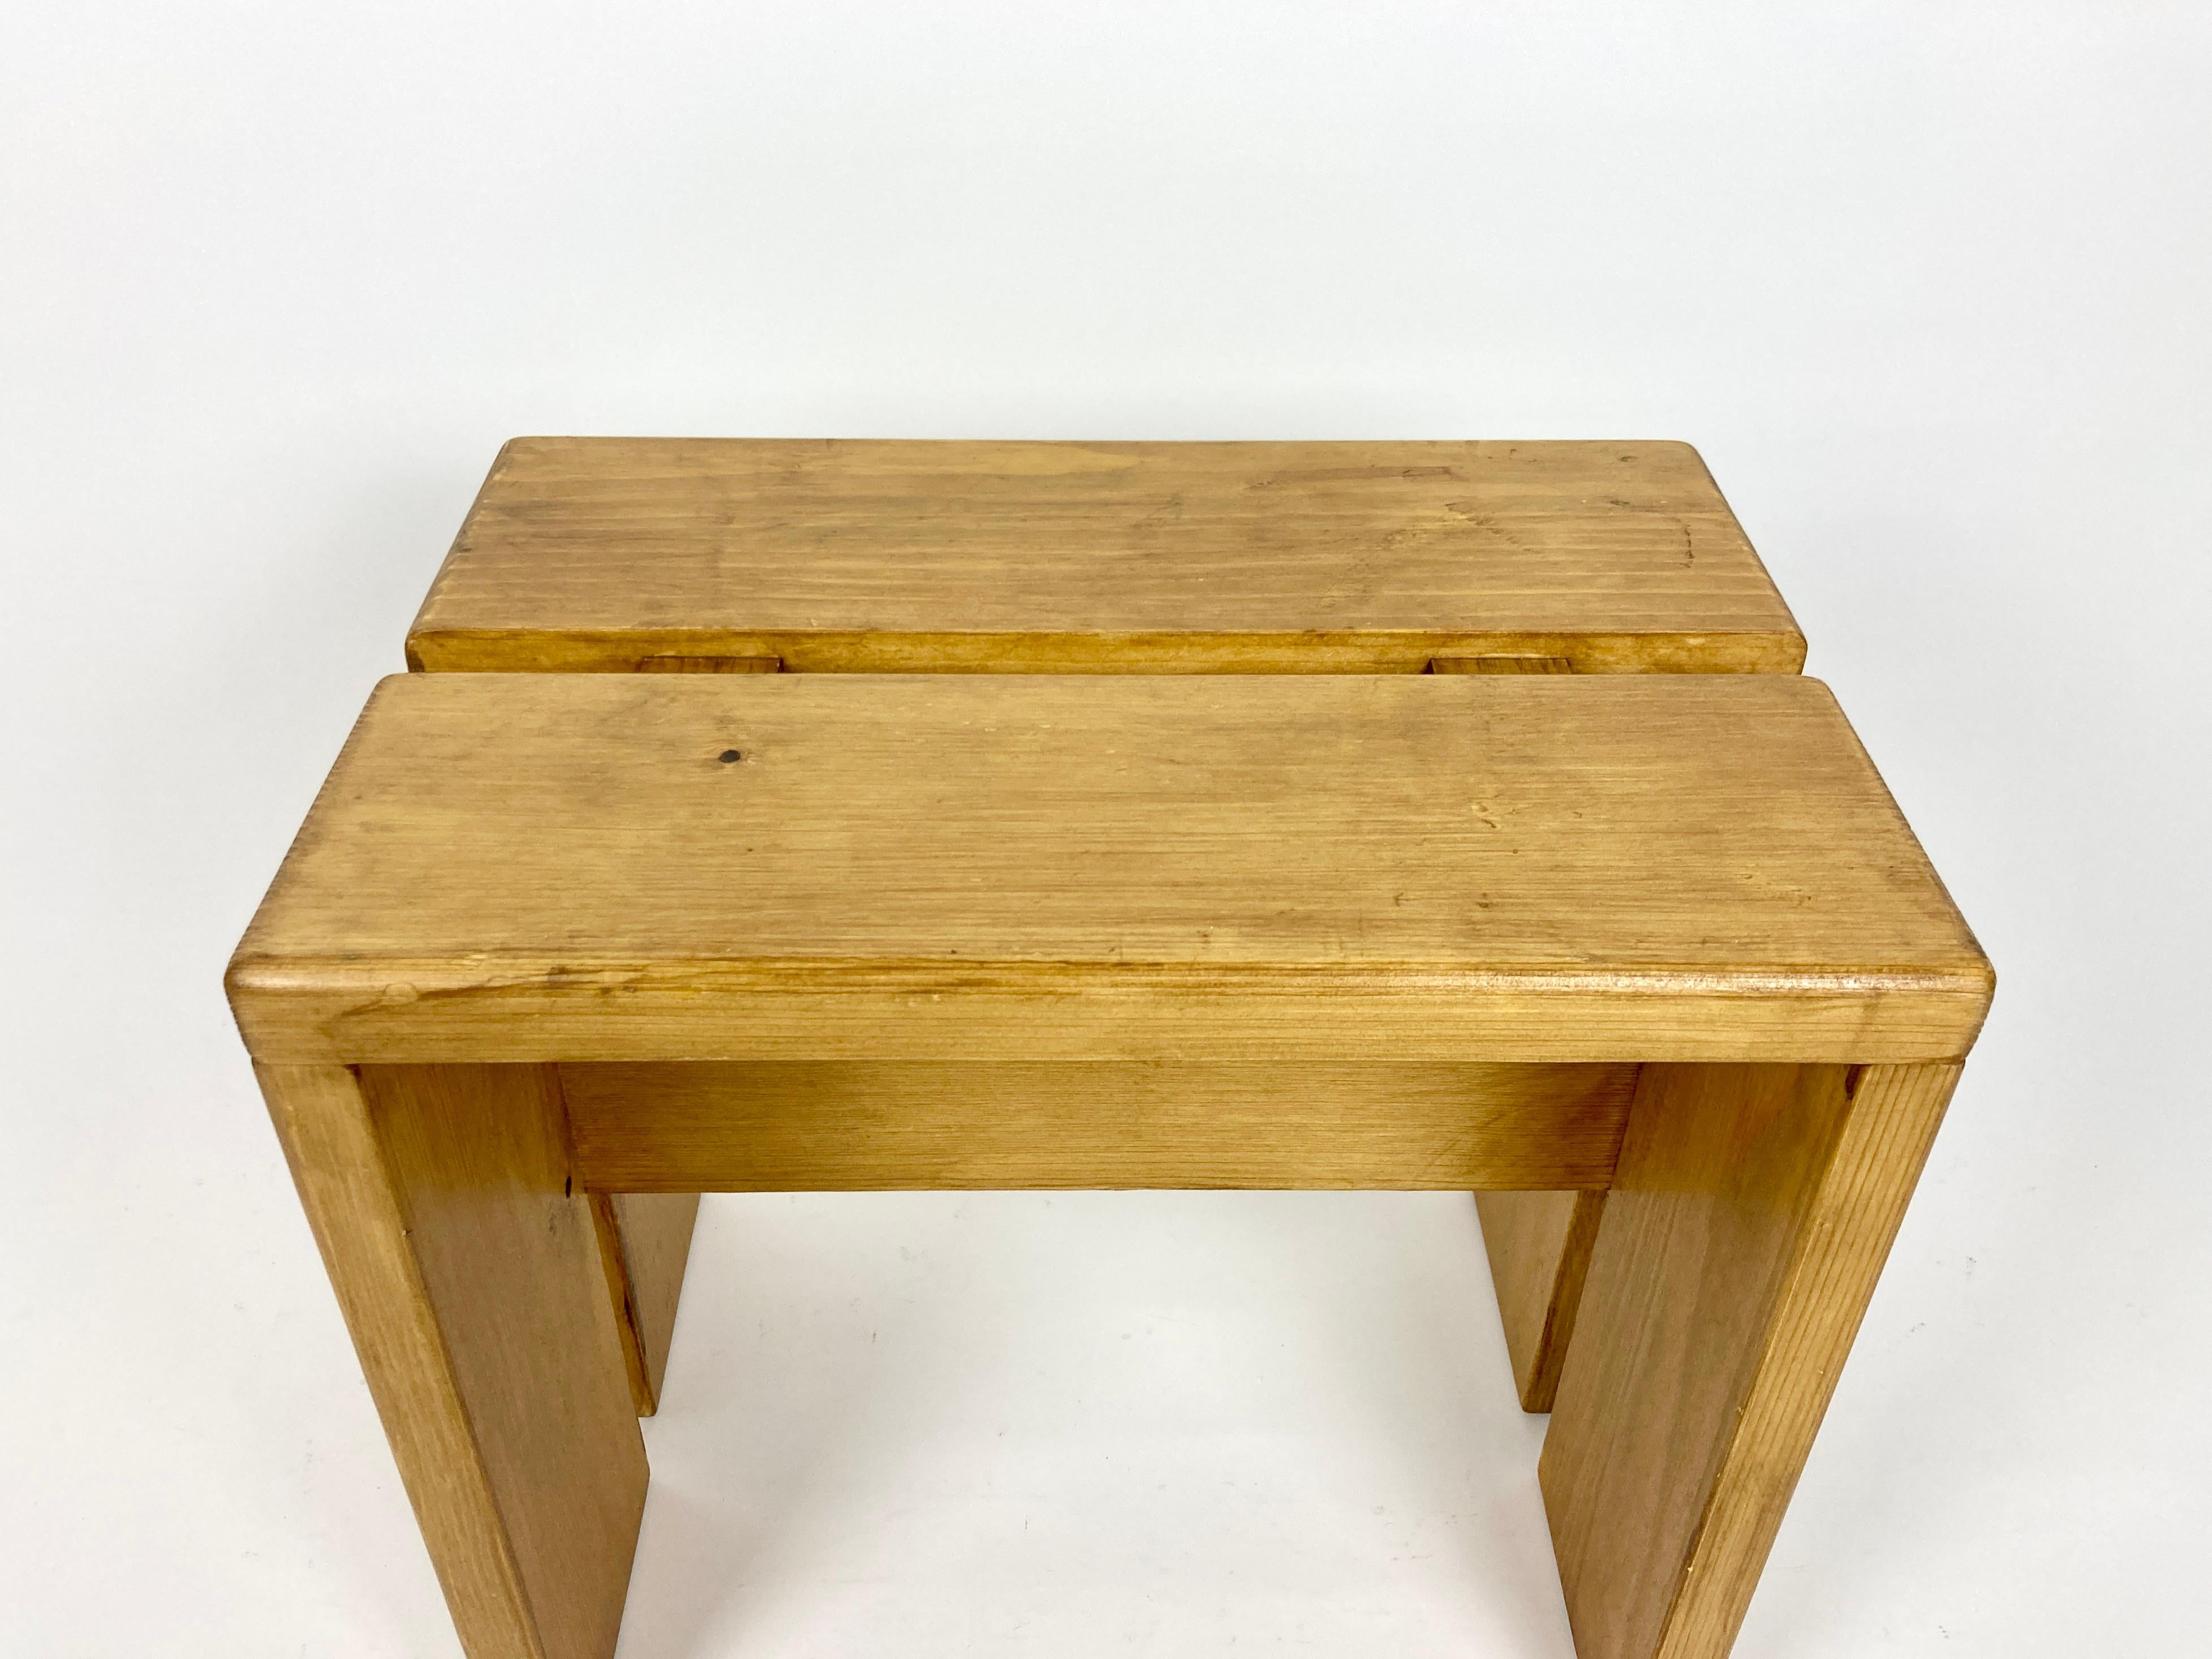 Stool/side table selected by Charlotte Perriand for the Les Arcs resort. France, 1970s.

Made of pine. No structural damage or old repairs, very solid.

Great original condition with wear and patina as pictured, nice rich wood tone. Cleaned, ready